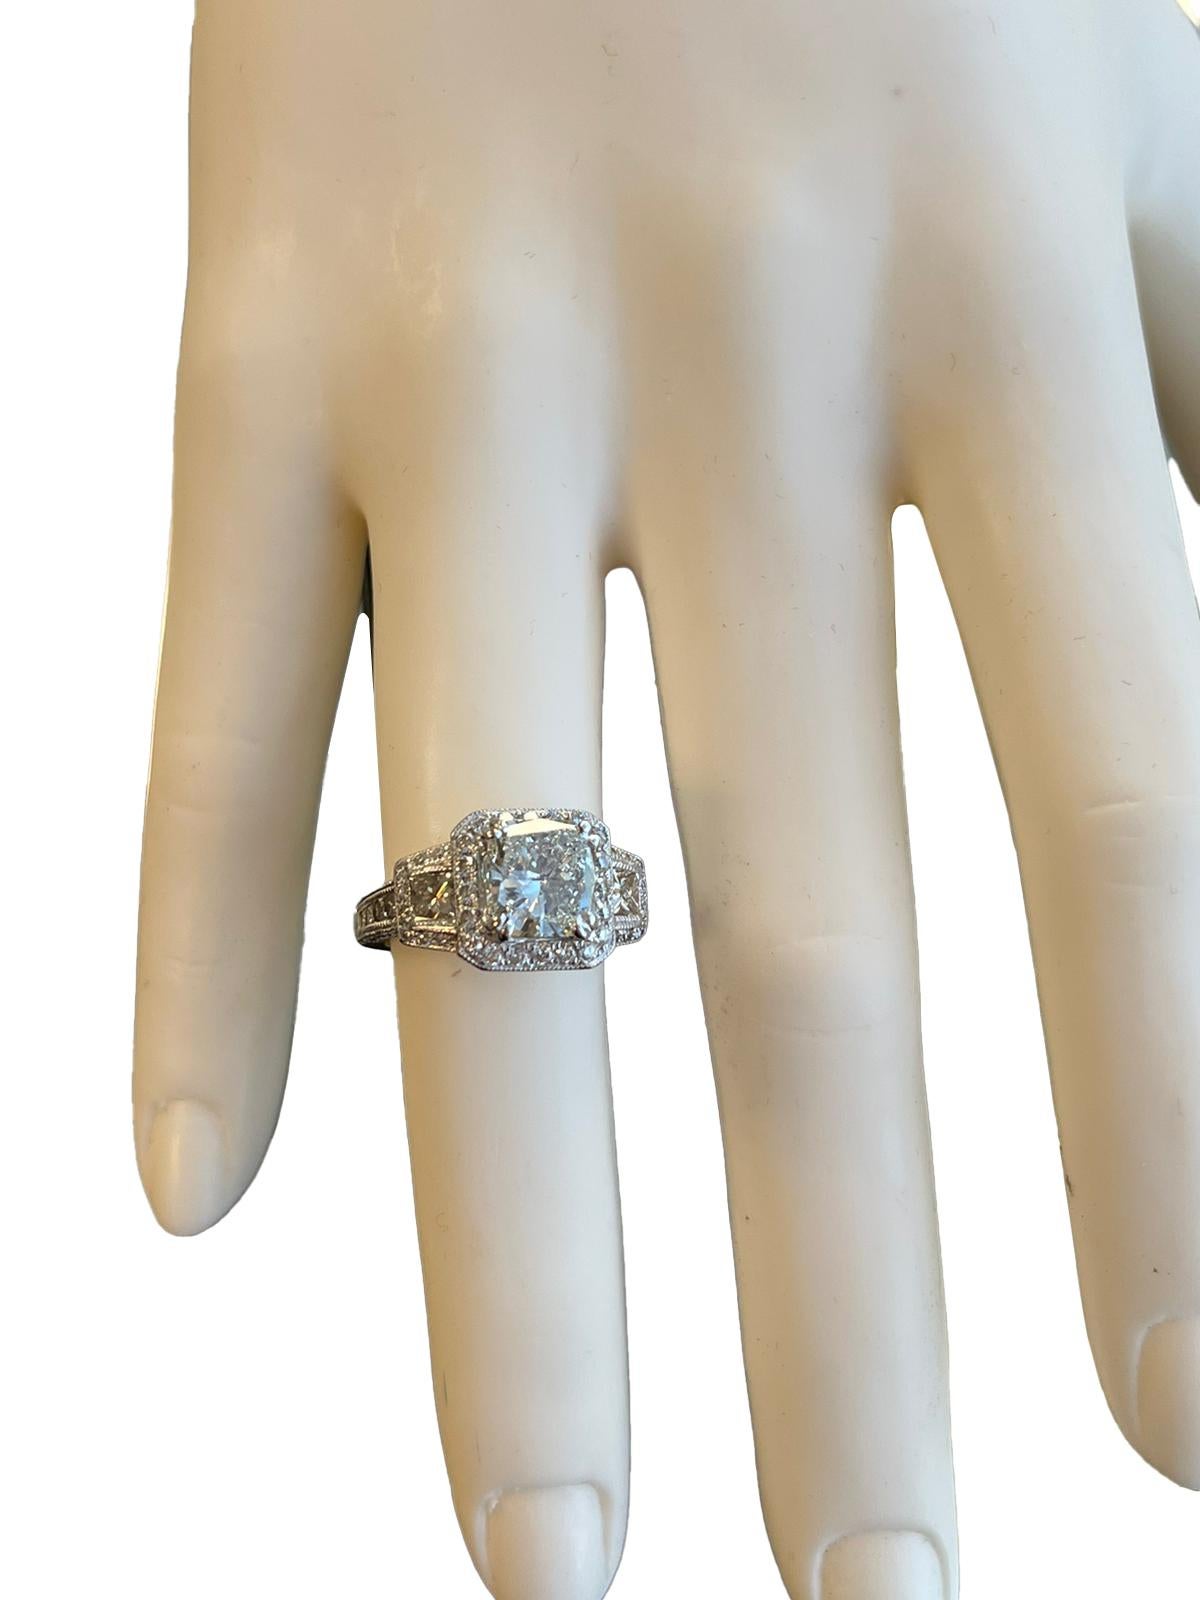 Exceptional GIA Graded 2.02 Carat Cushion Diamond Ring with 0.68ct Pave 14k Gold For Sale 1